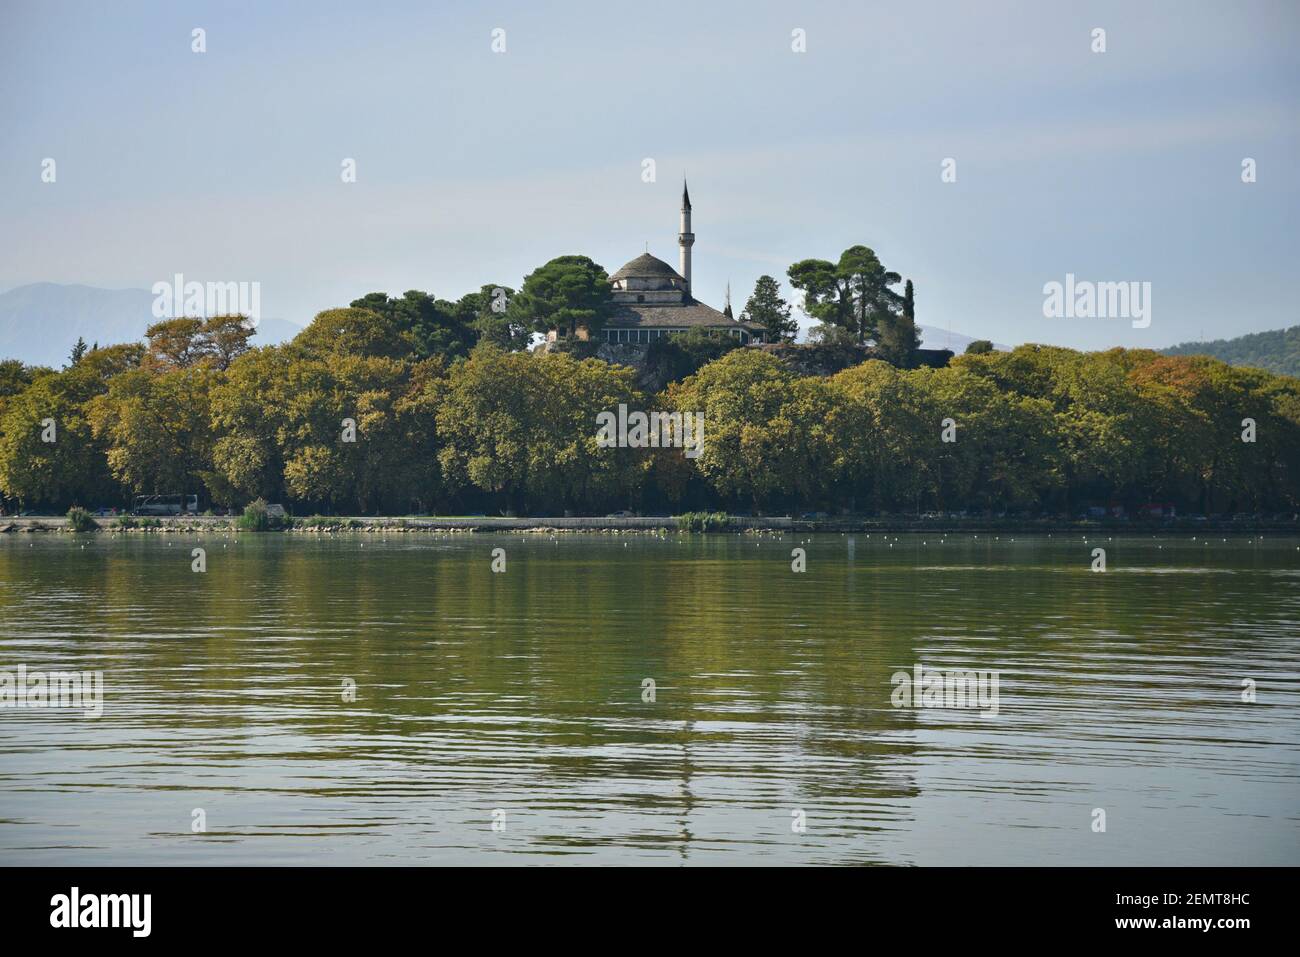 Landscape with panoramic view of the Ottoman Fethiye Mosque on Pamvotis Lake in Ioannina, Epirus, Greece. Stock Photo